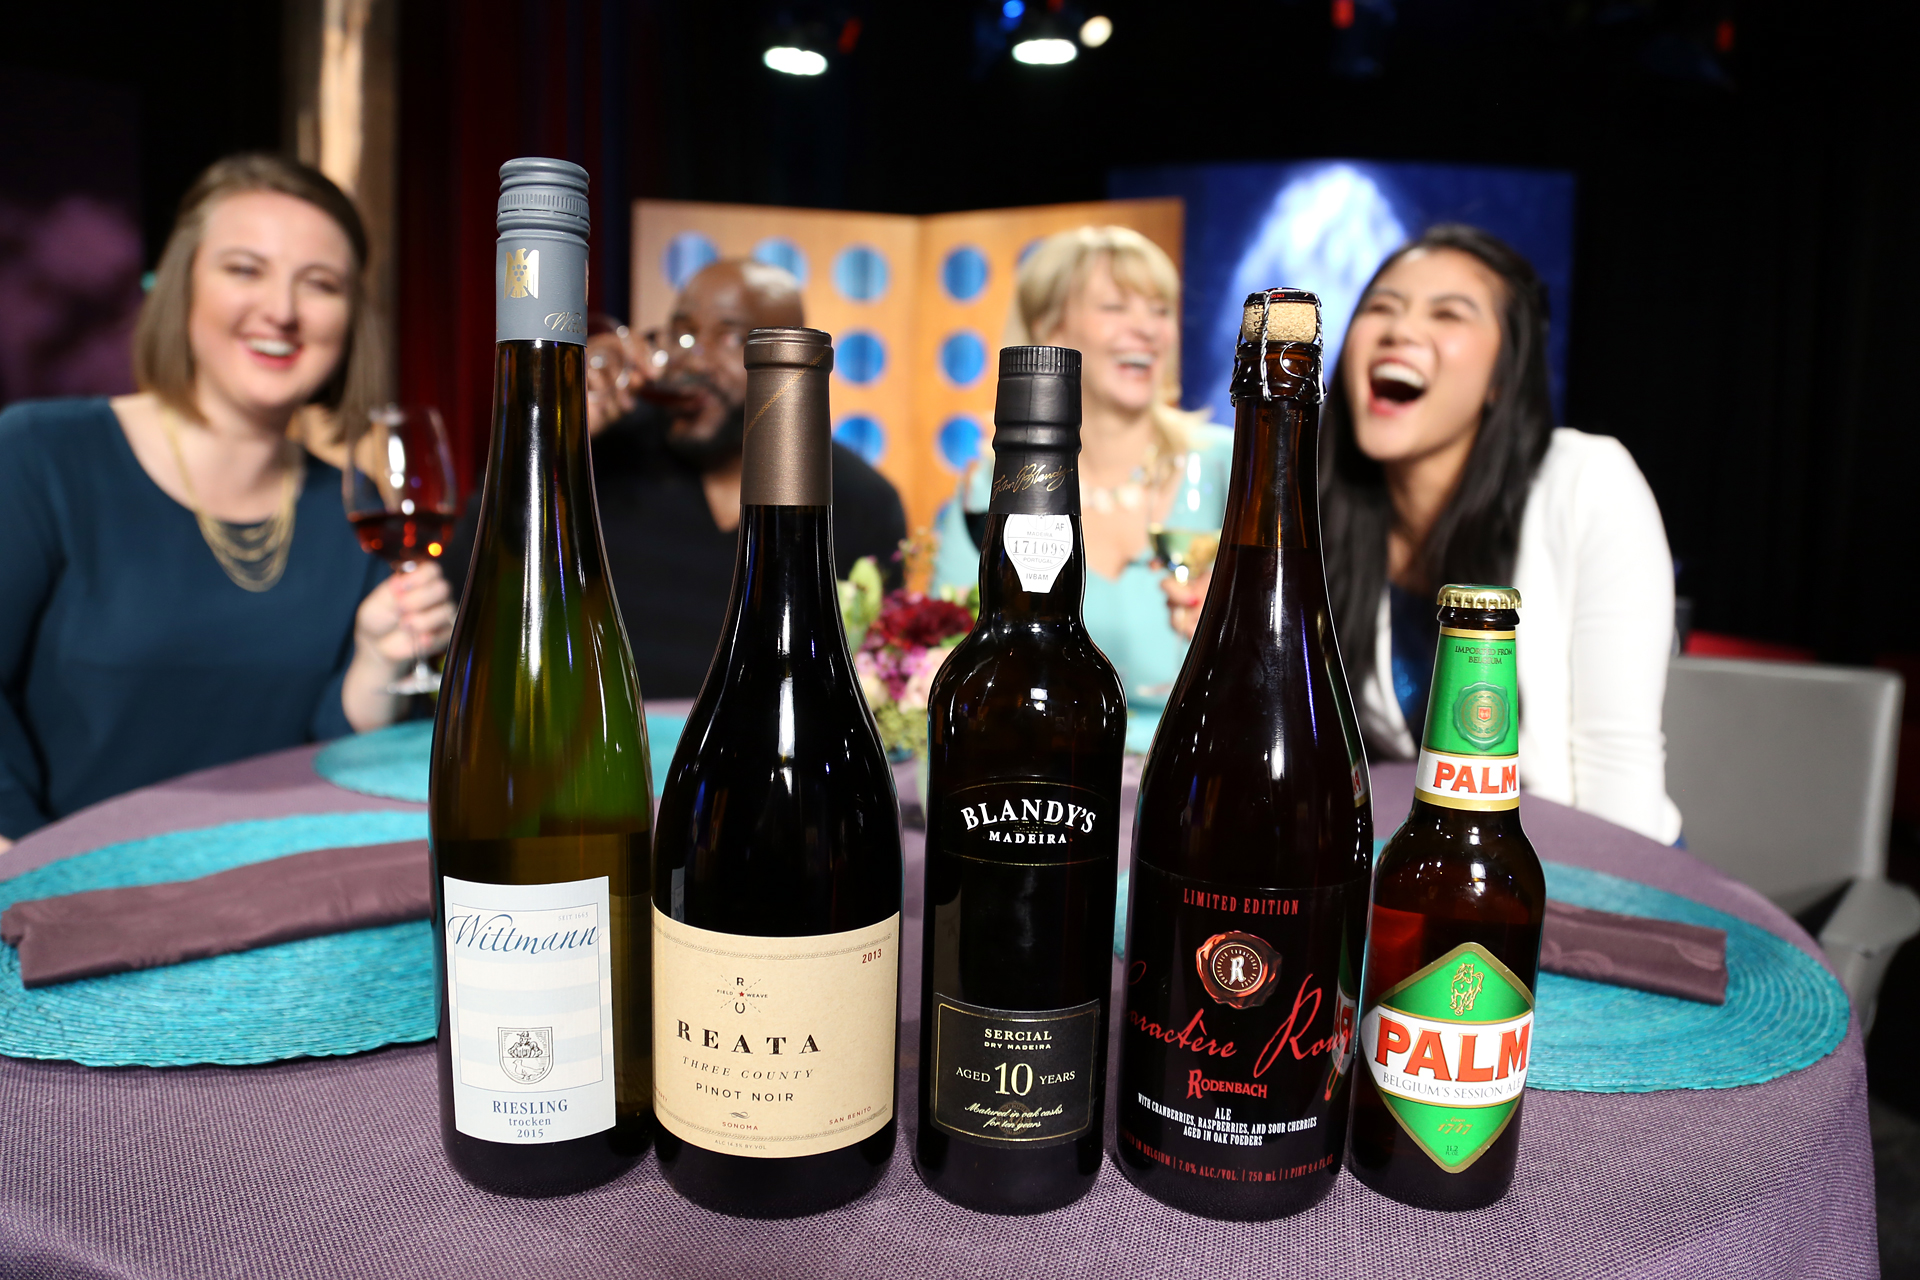 Wines that guests drank on the set of season 12 episode 3.